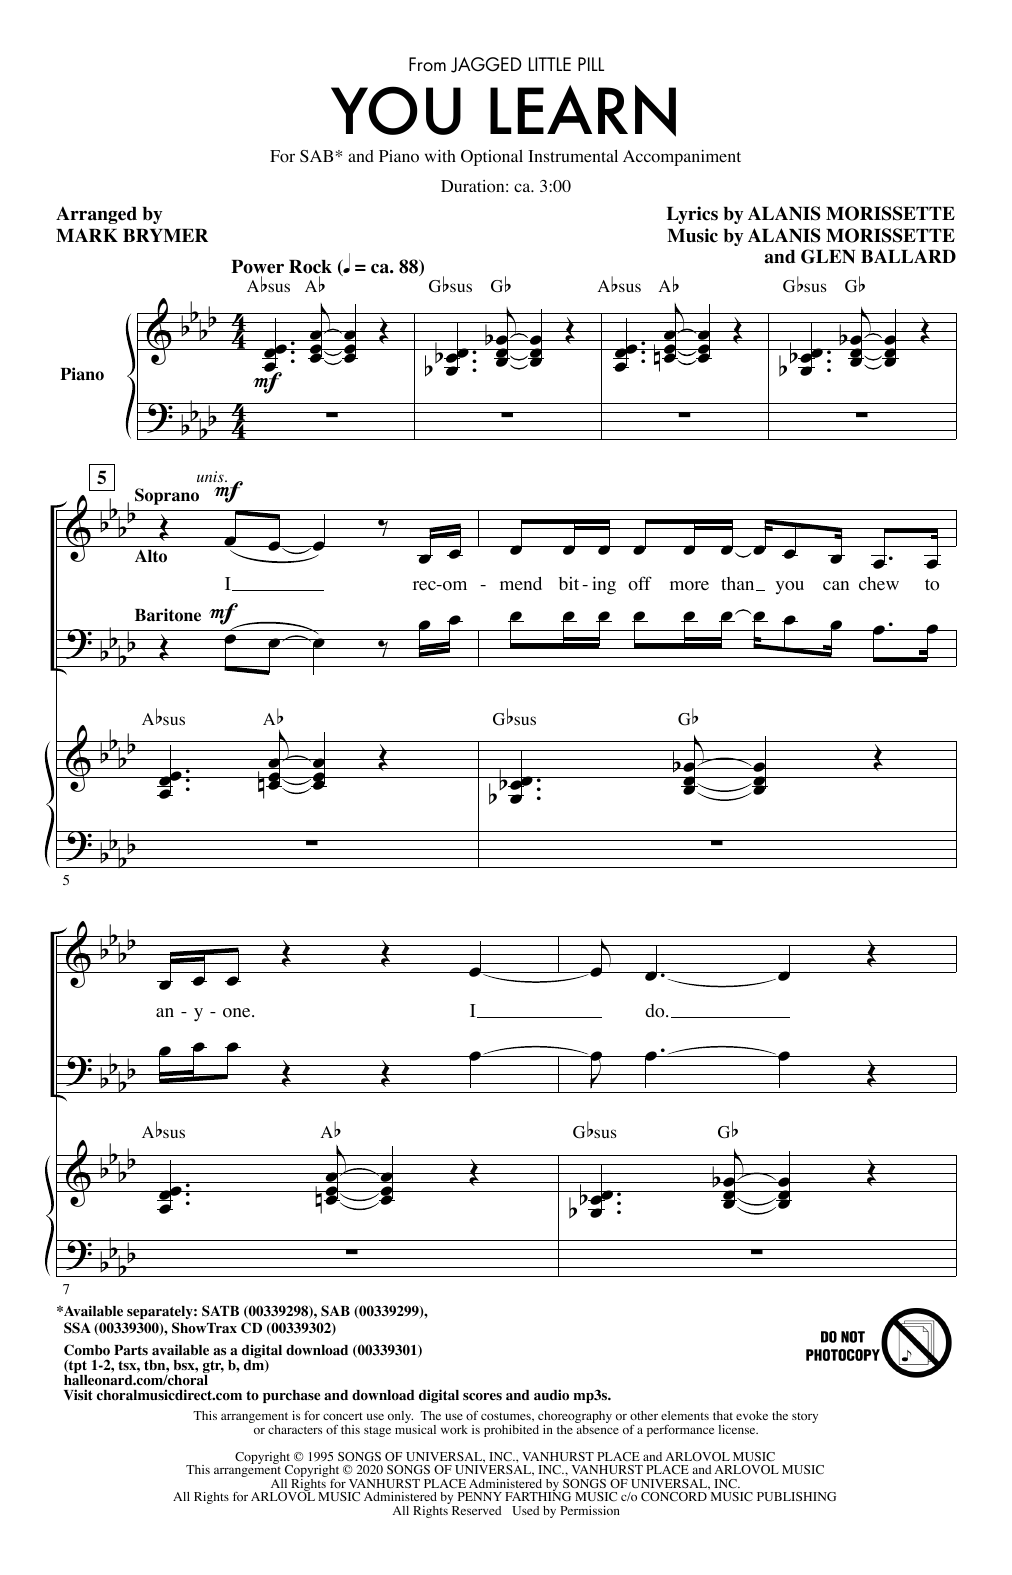 Download Alanis Morissette You Learn (from Jagged Little Pill) (ar Sheet Music